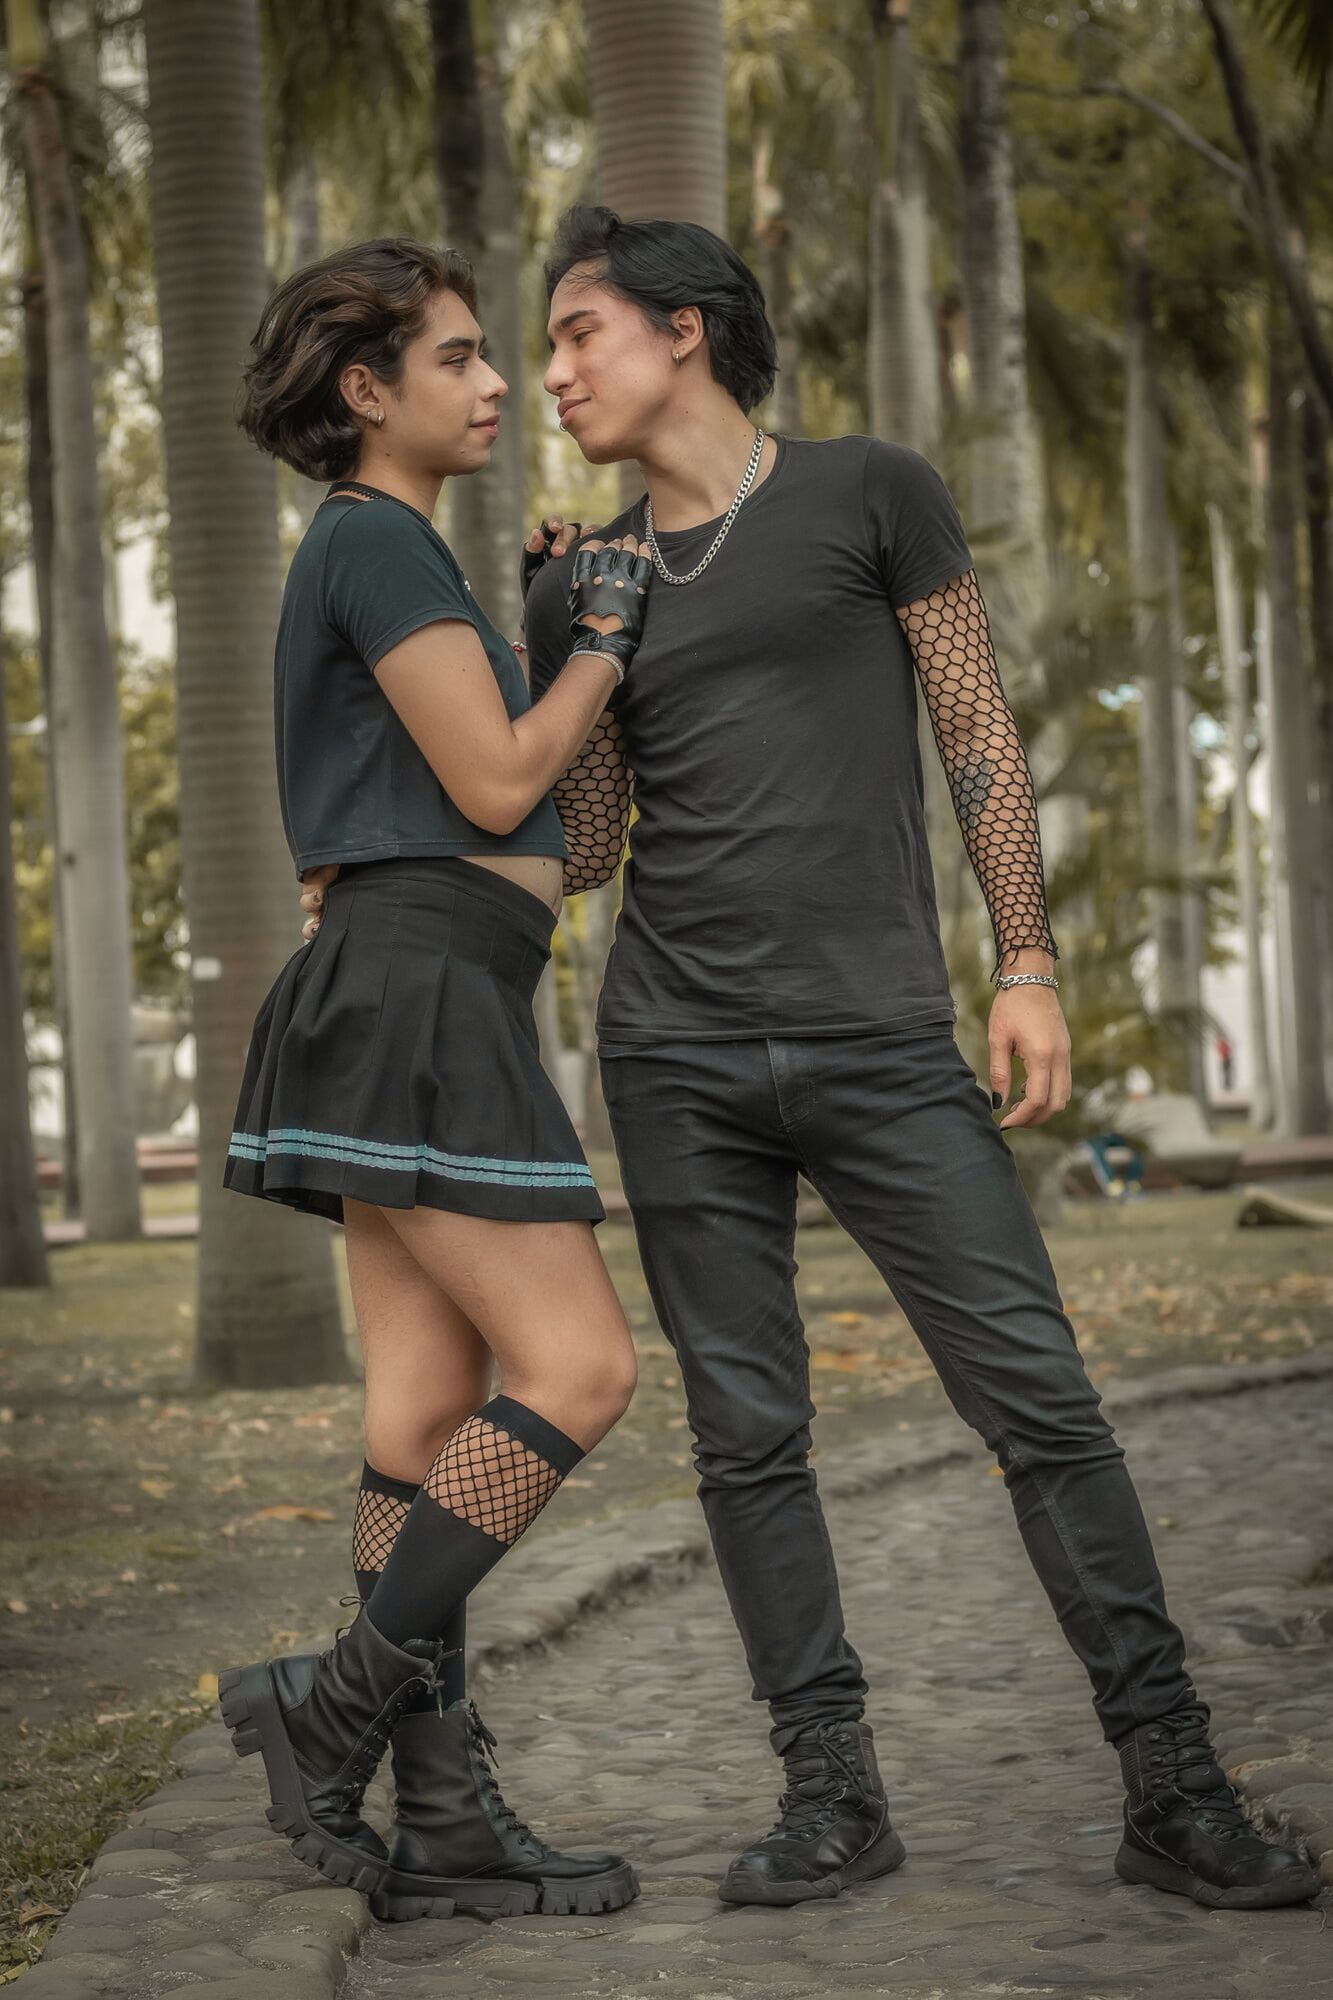 NICO AND DANNI IN THE STREET #6